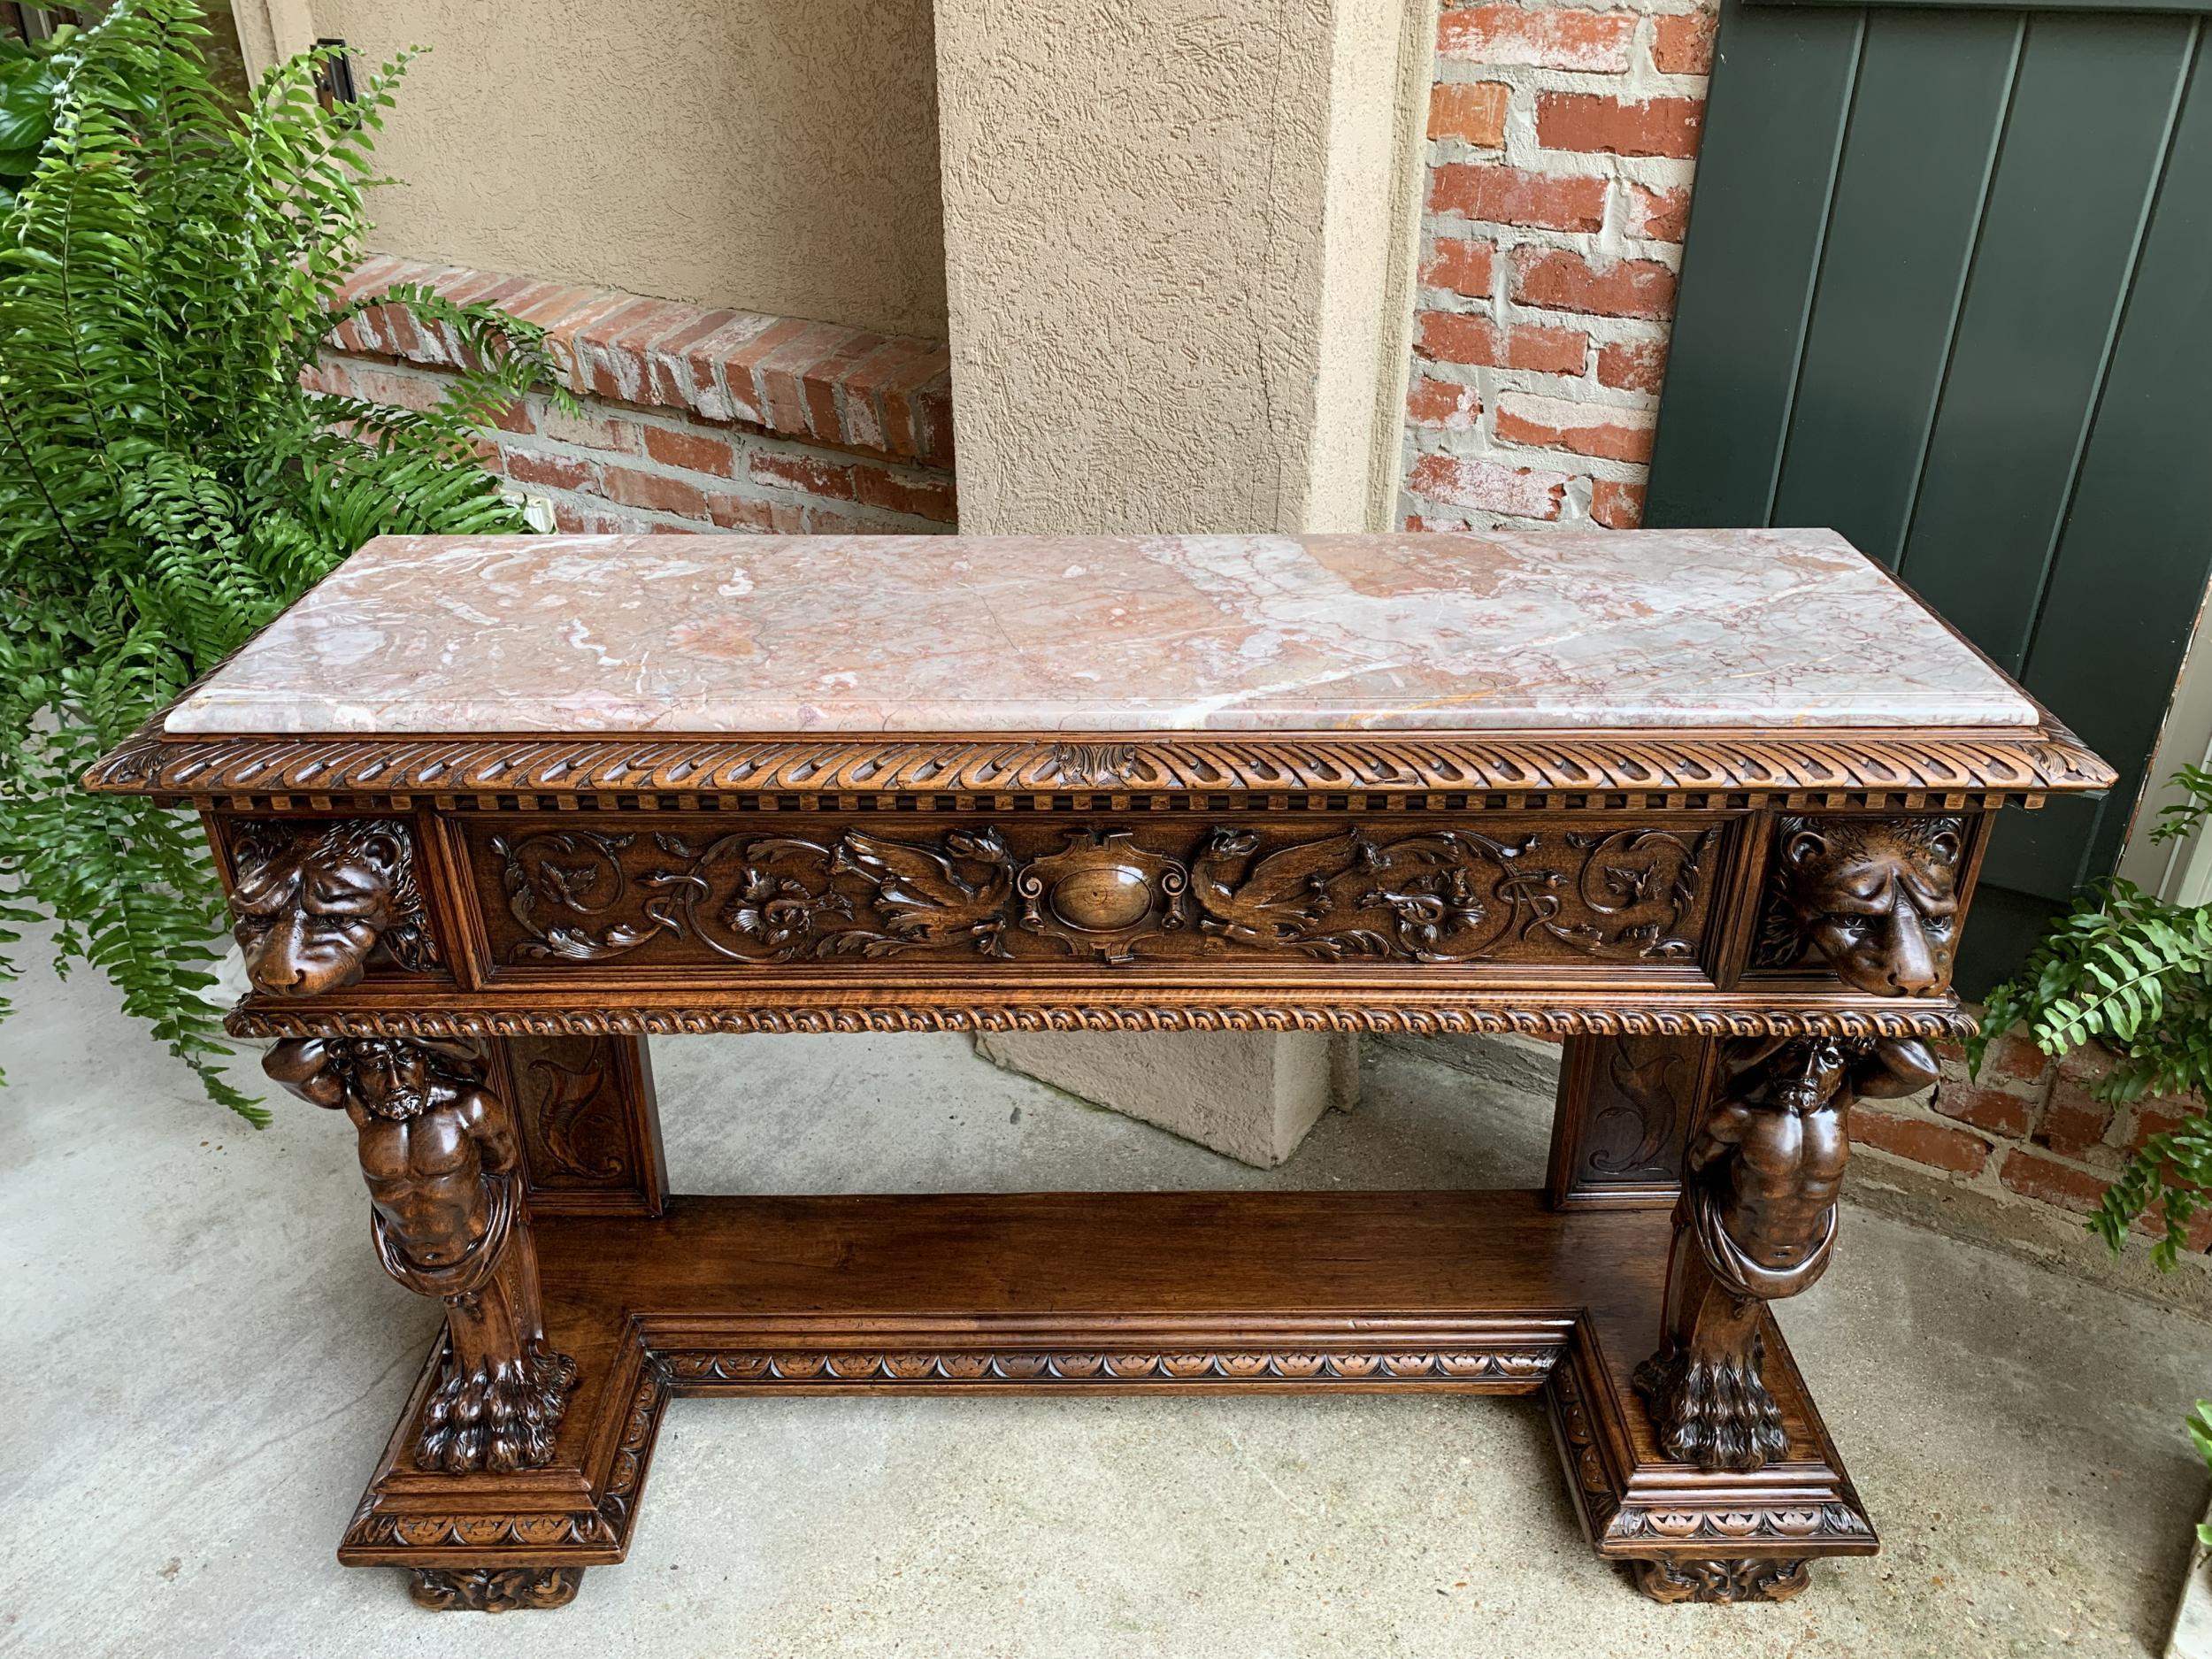 Antique French carved foyer sofa table Renaissance marble planter Hercules lion

~Direct from France~
~Gorgeous, heavily carved antique foyer or sofa table having meticulously carved details and a thick, beveled edge marble top~
~Large,